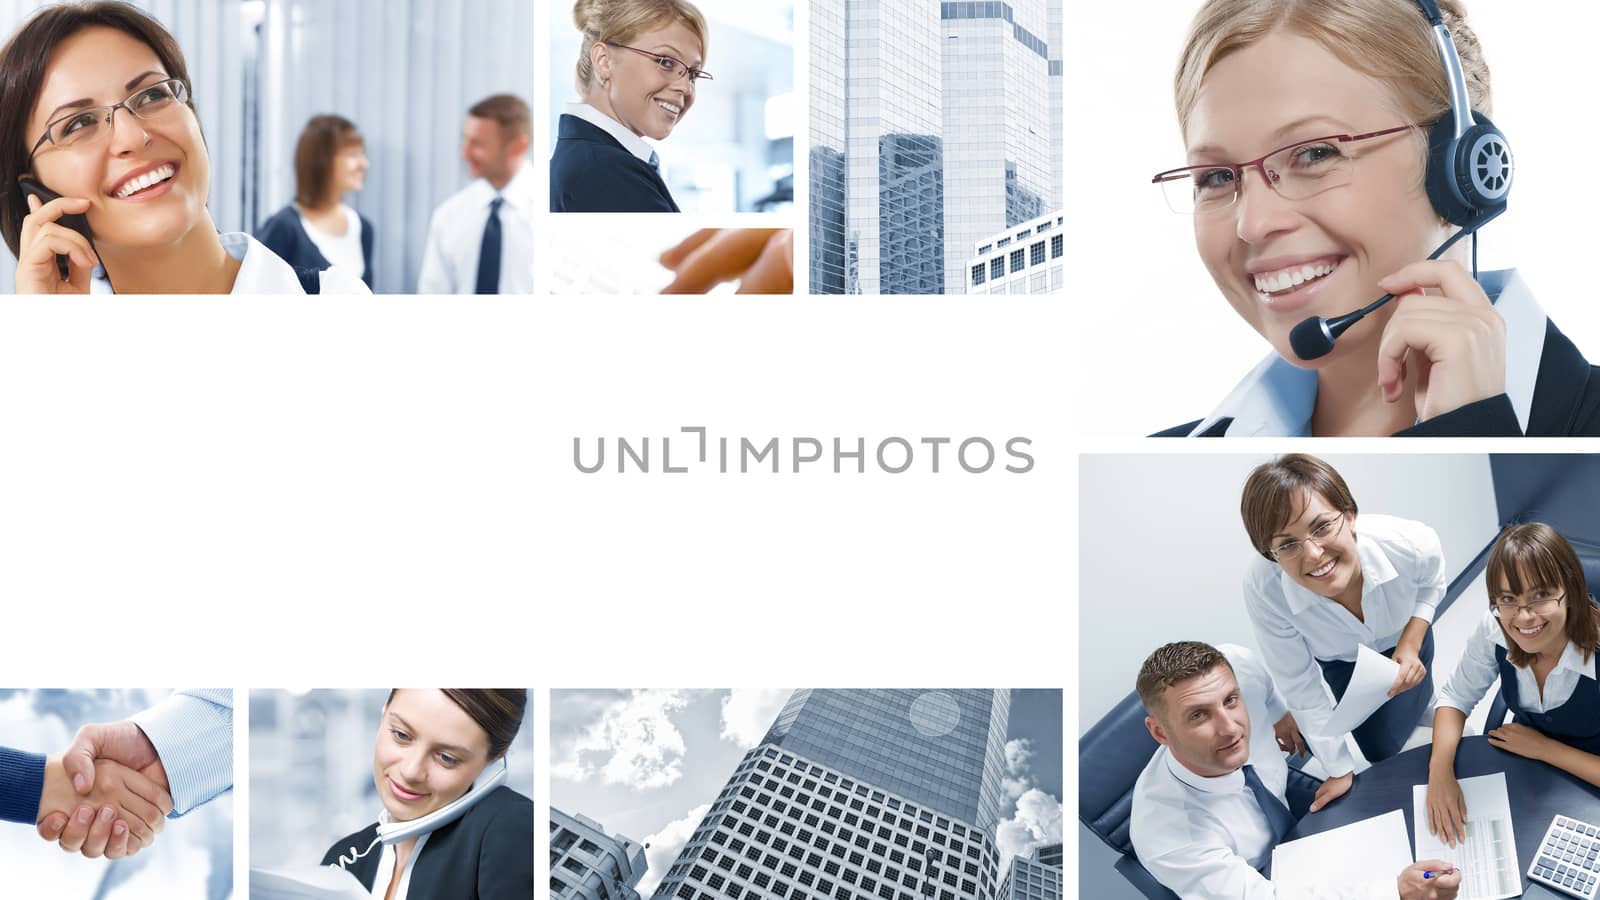 Business theme collage composed of different images